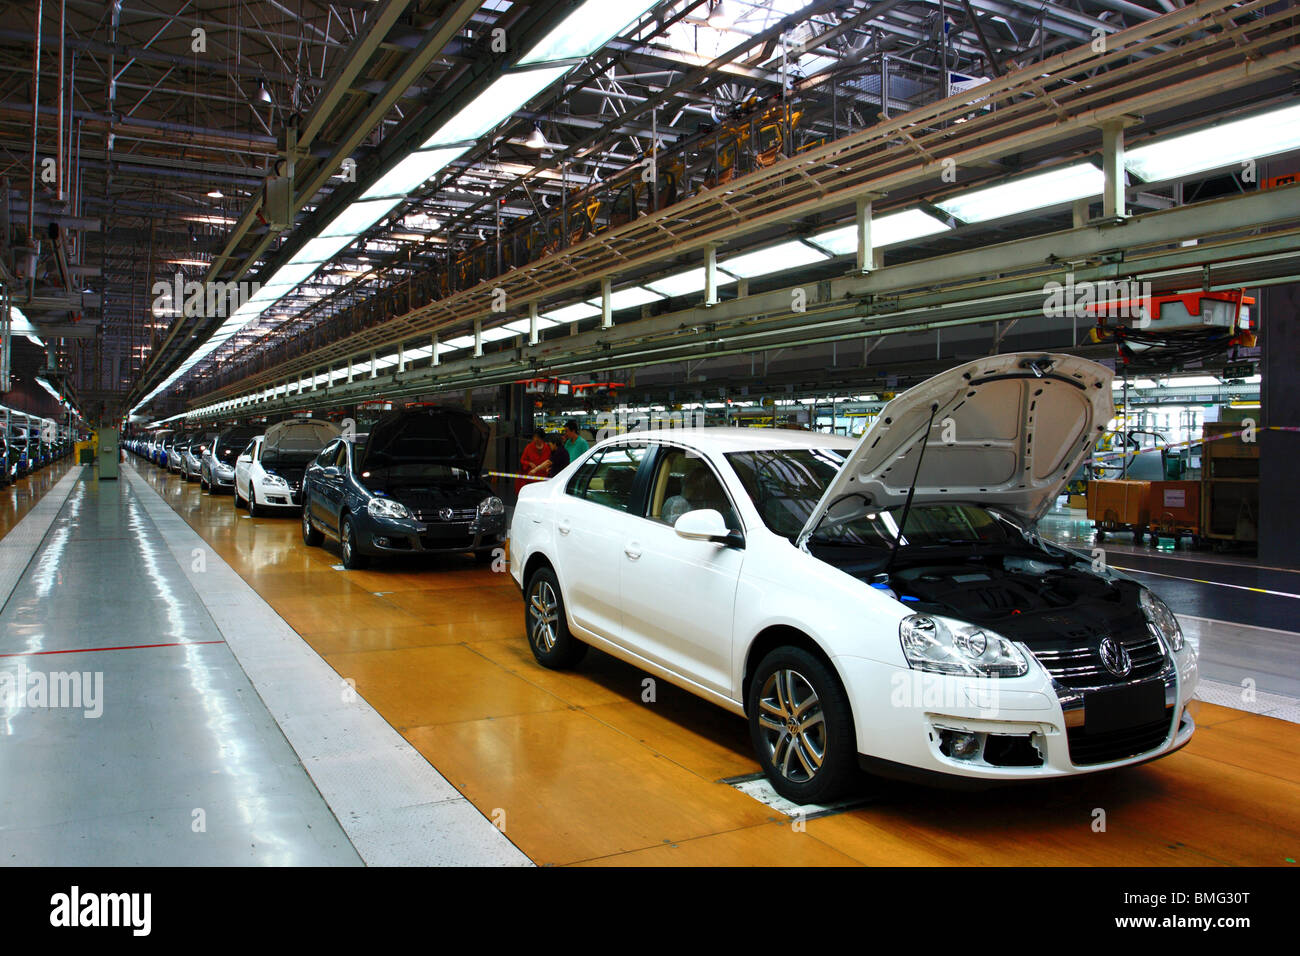 Cars on assembly line, First Automobile Works, Changchun, Jilin Province, China Stock Photo